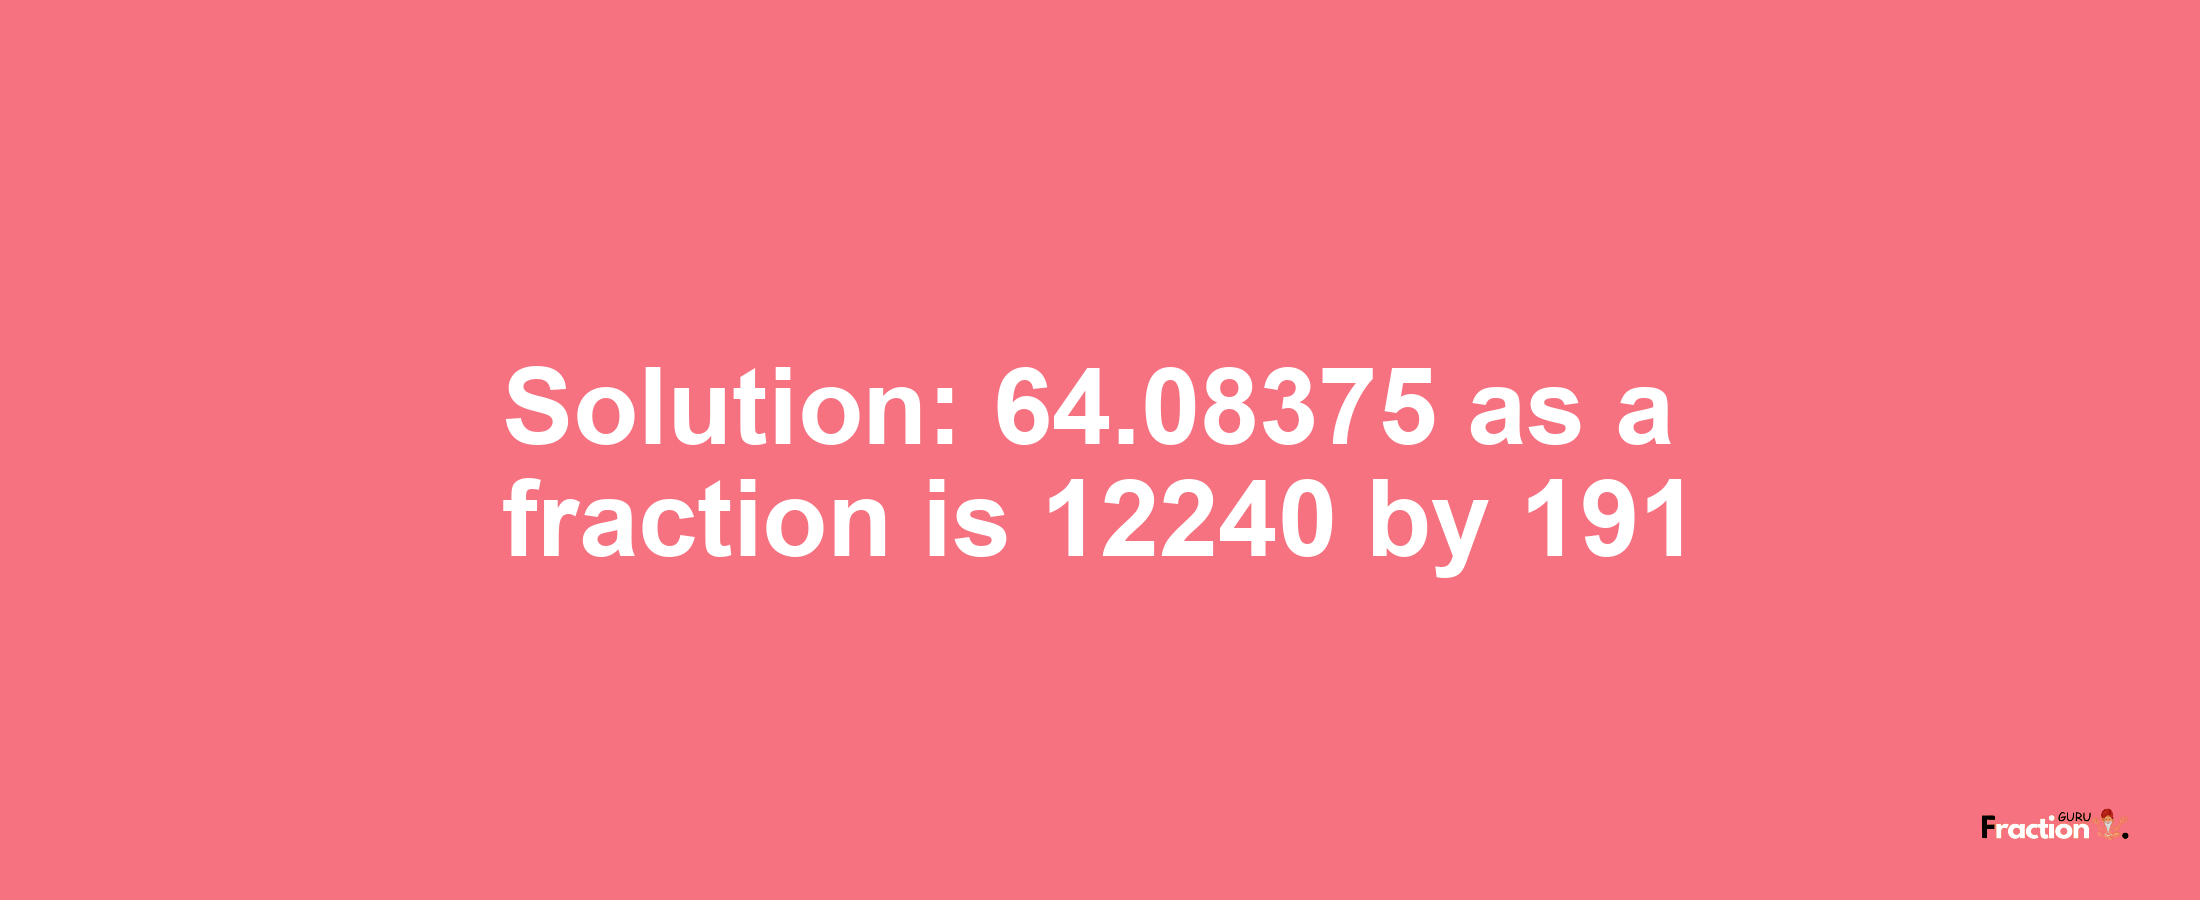 Solution:64.08375 as a fraction is 12240/191